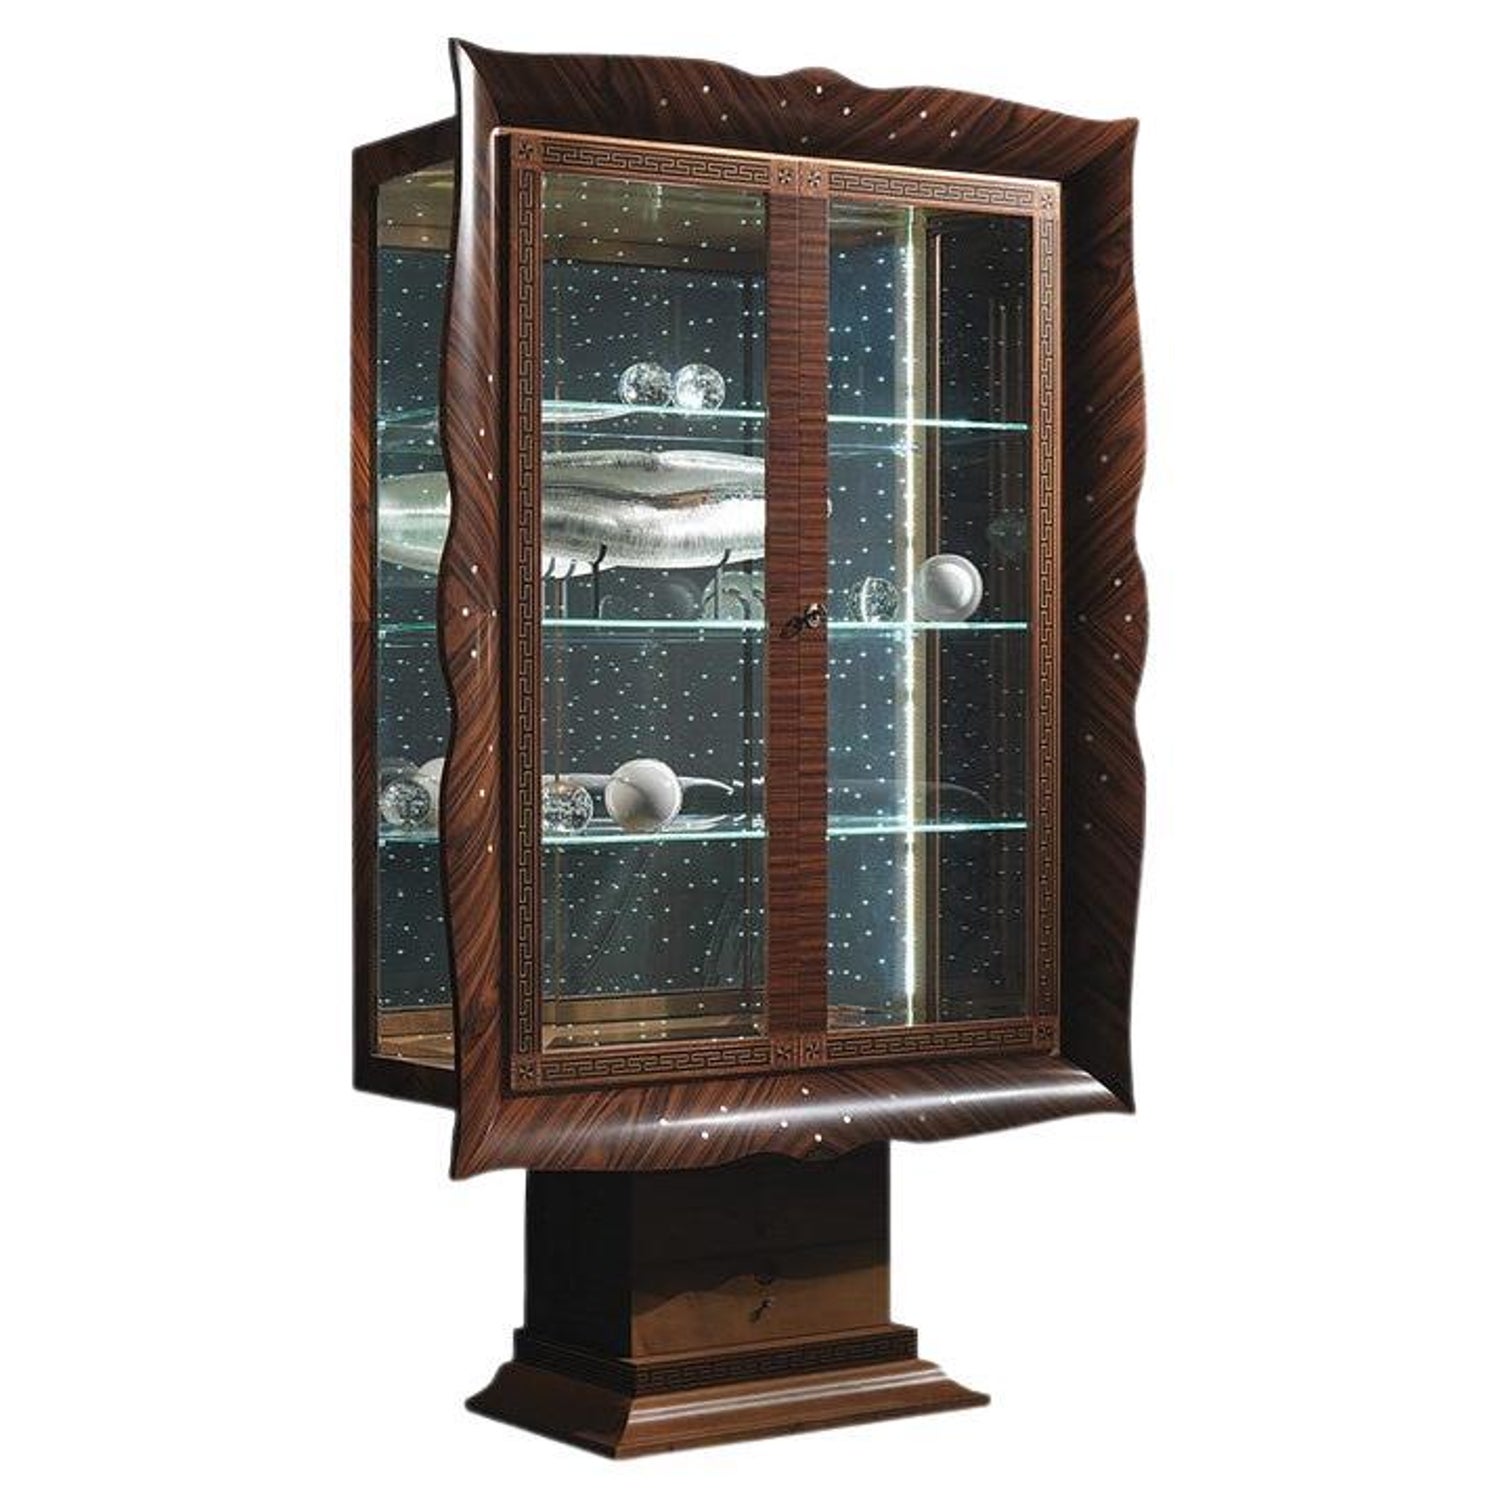 Classic by Carpanelli Hermitage Vitrine For Sale at 1stDibs